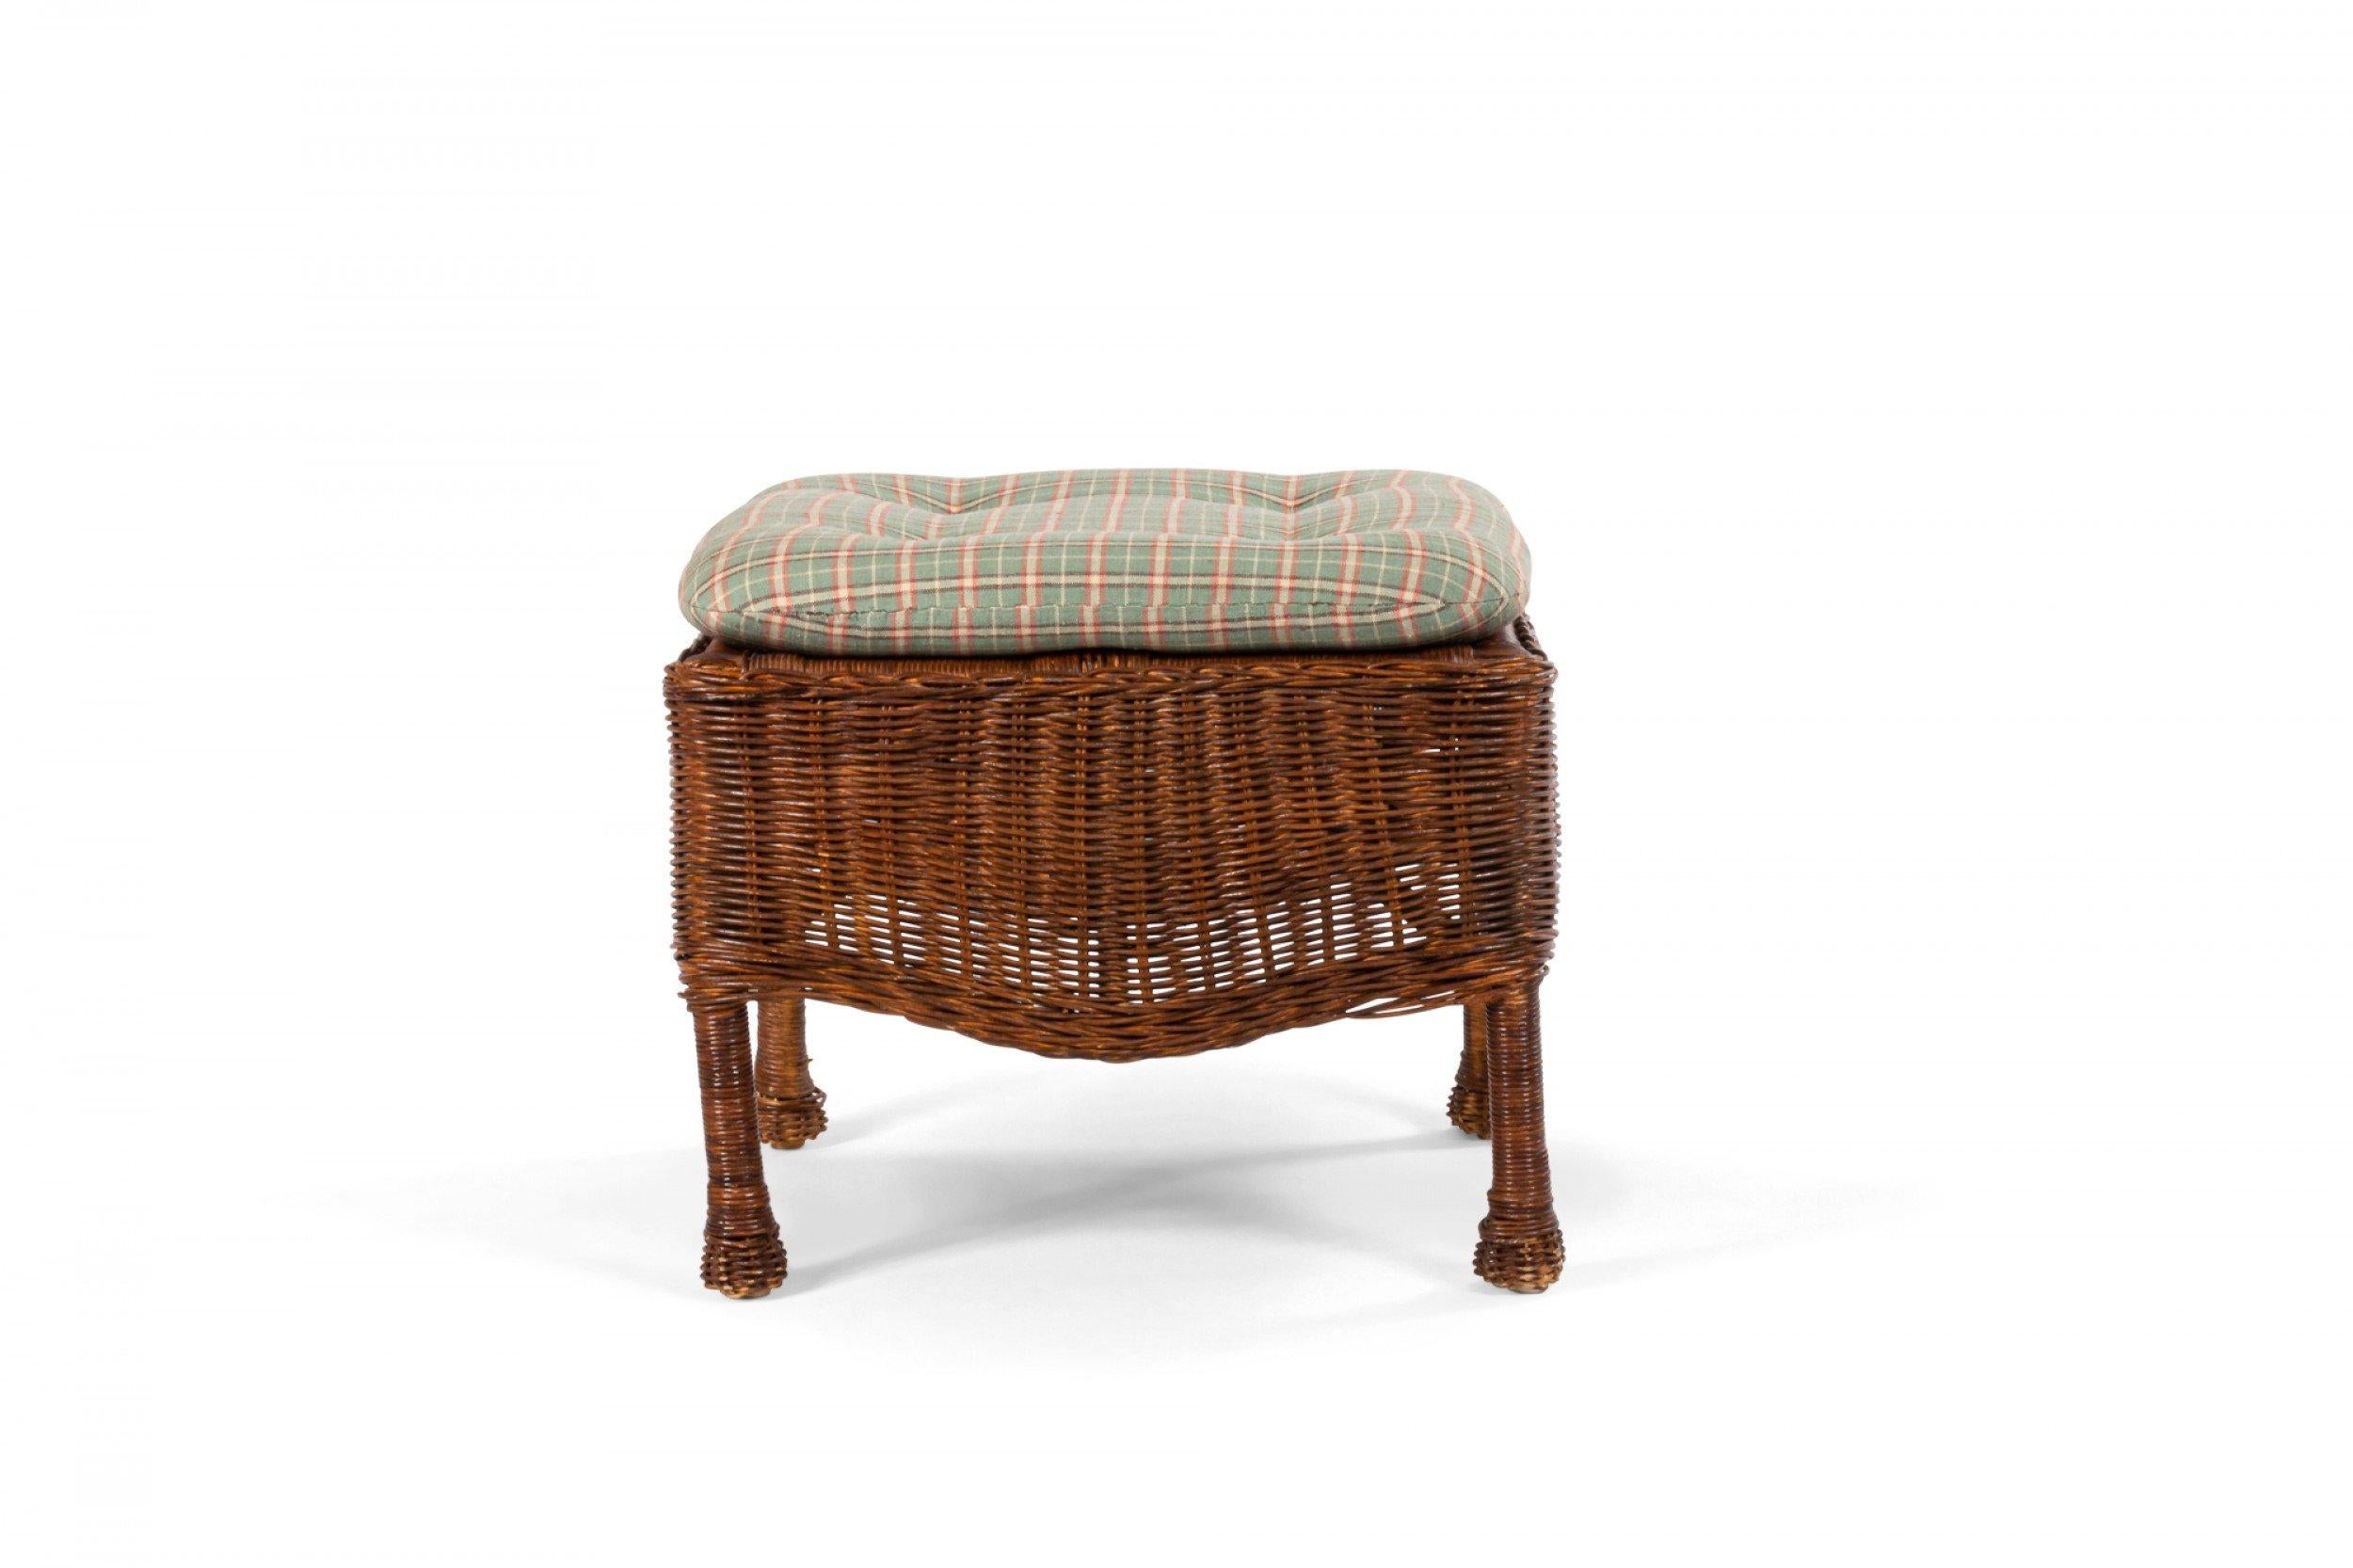 20th Century American Mission Style Wicker and Cushioned Ottoman